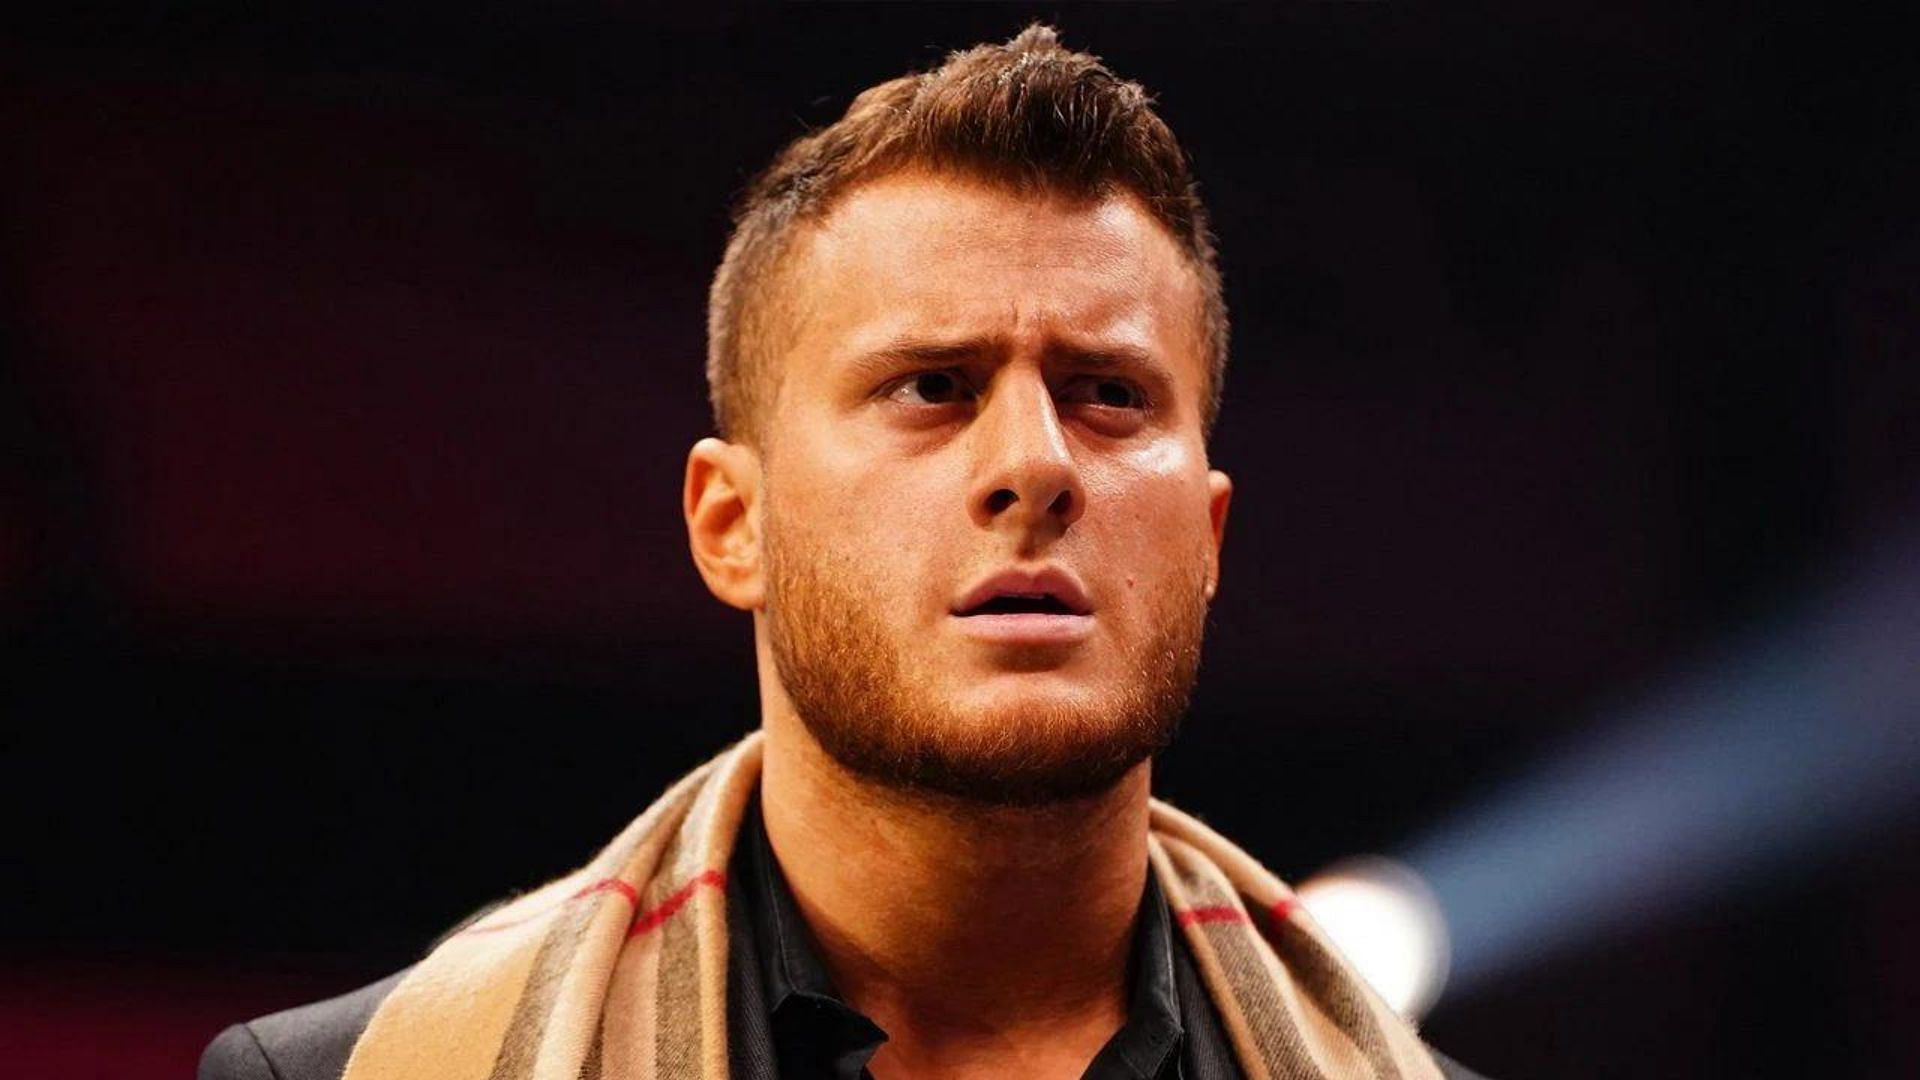 MJF is the hottest name in AEW right now